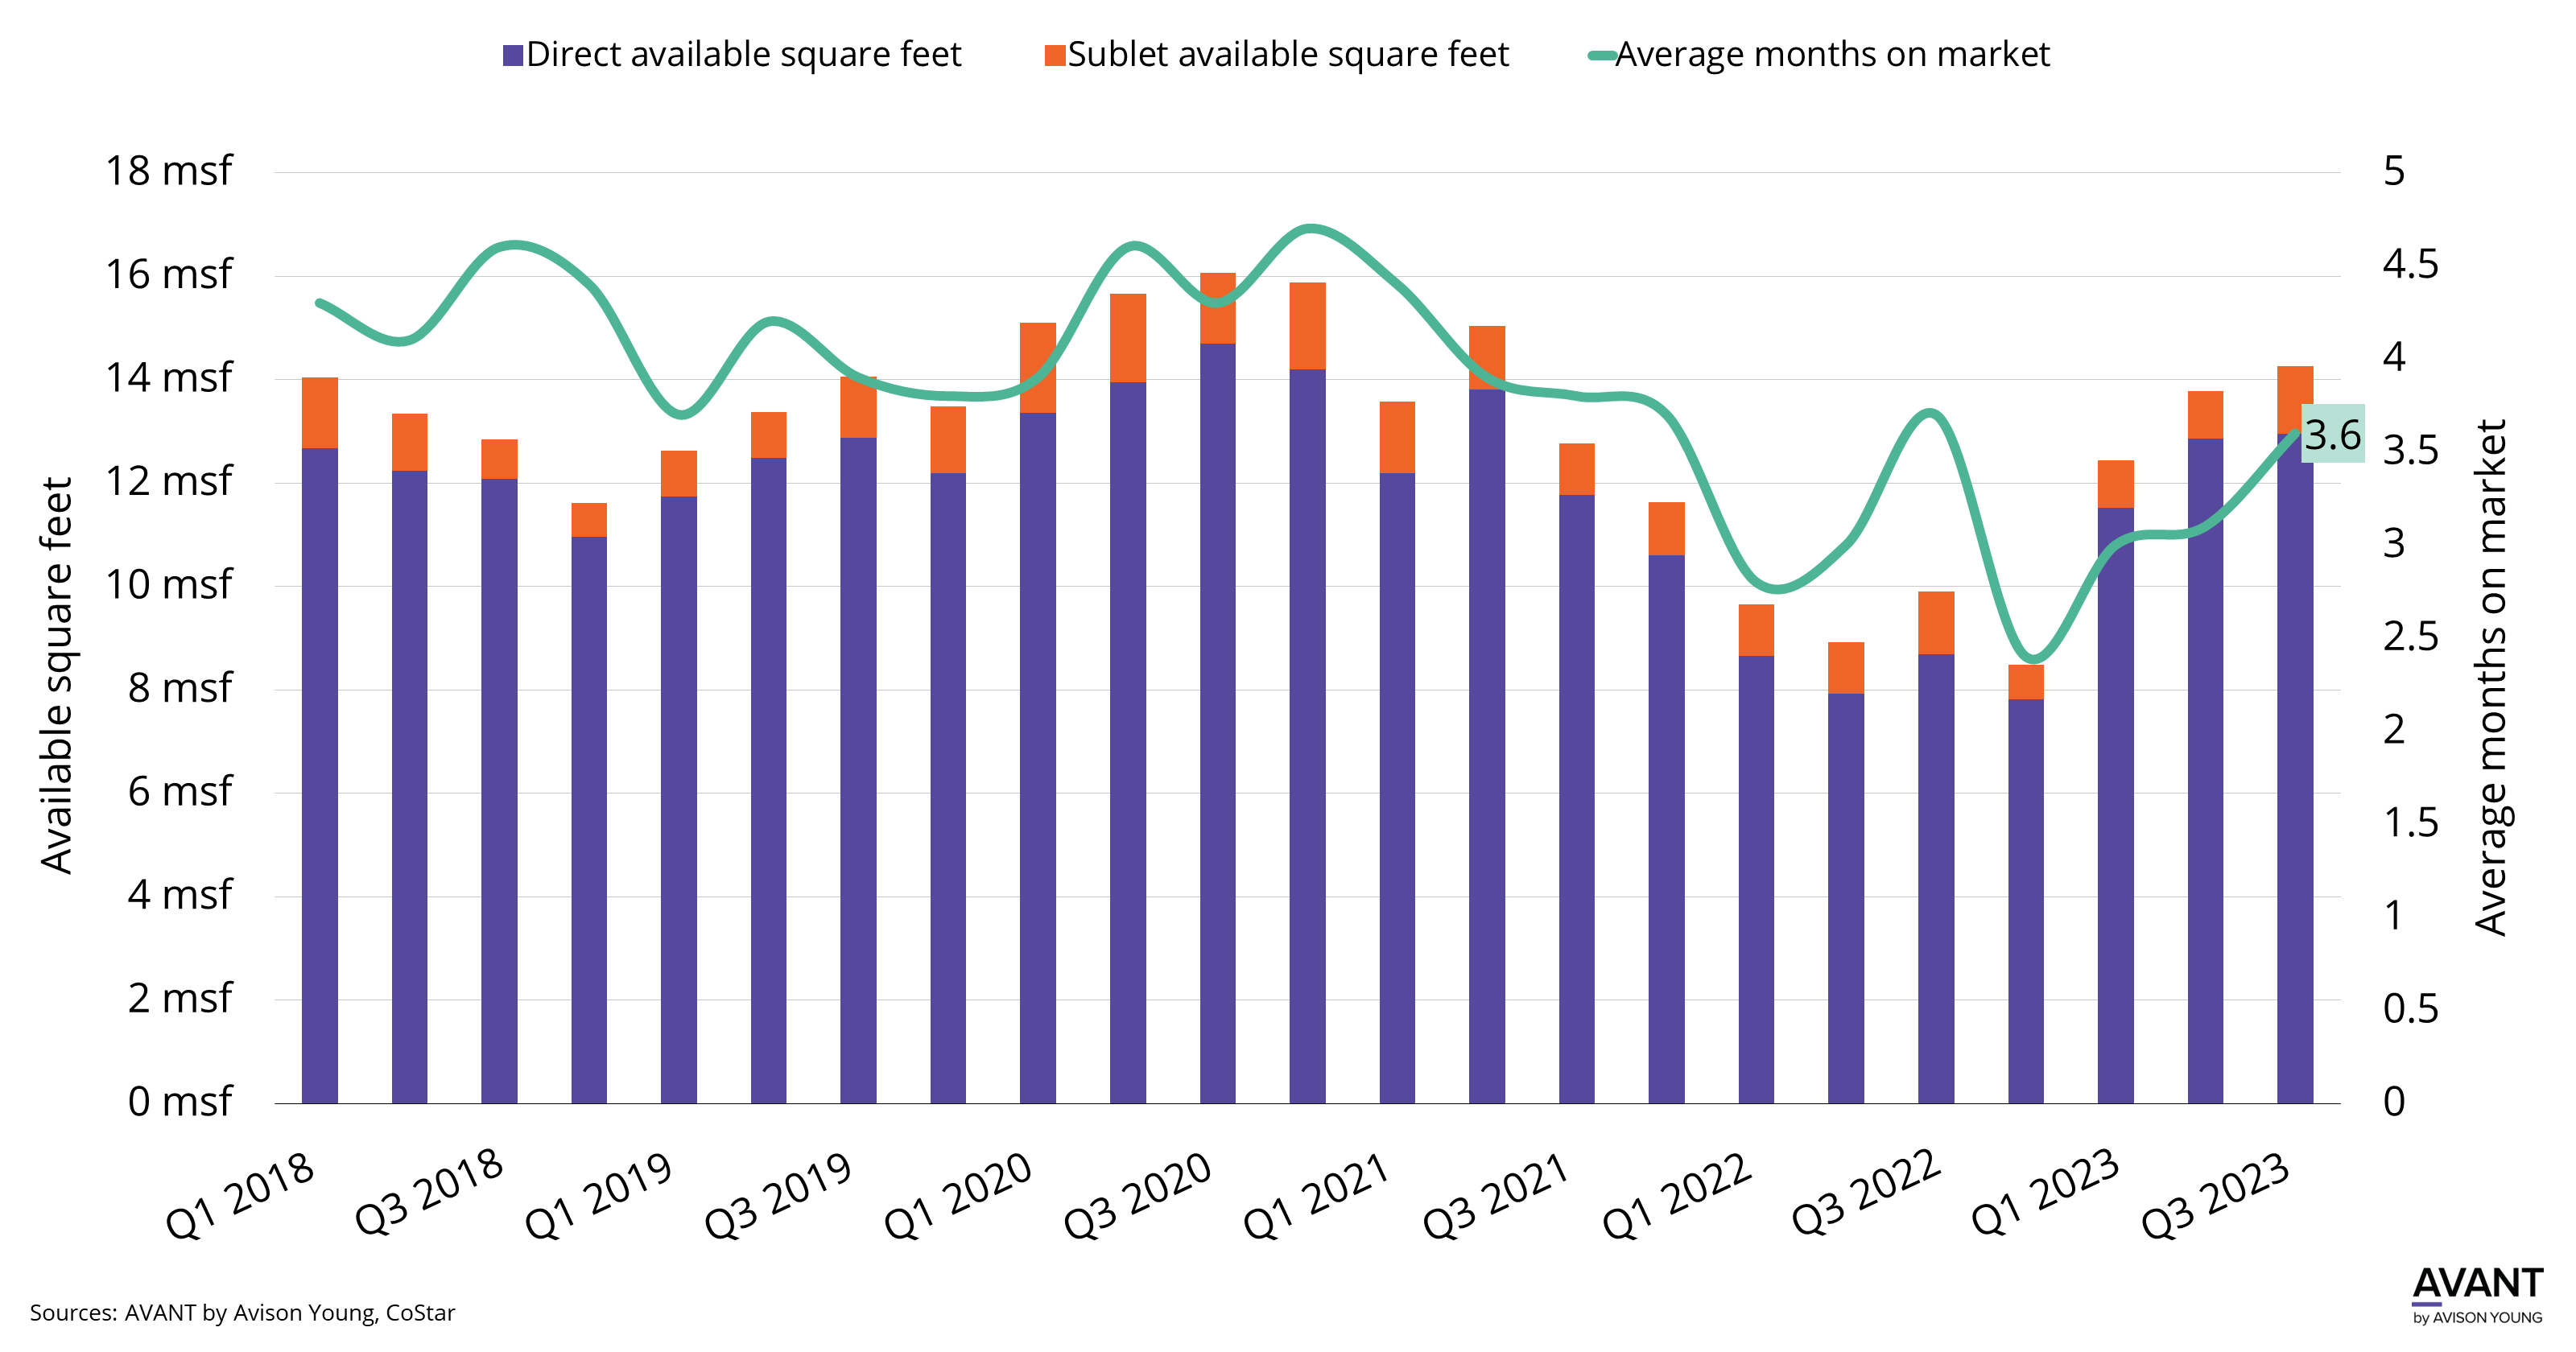 graph of direct available square feet, sublet available square feet and average time on market for industrial spaces in Miami from Q1 2018 to Q3 2023